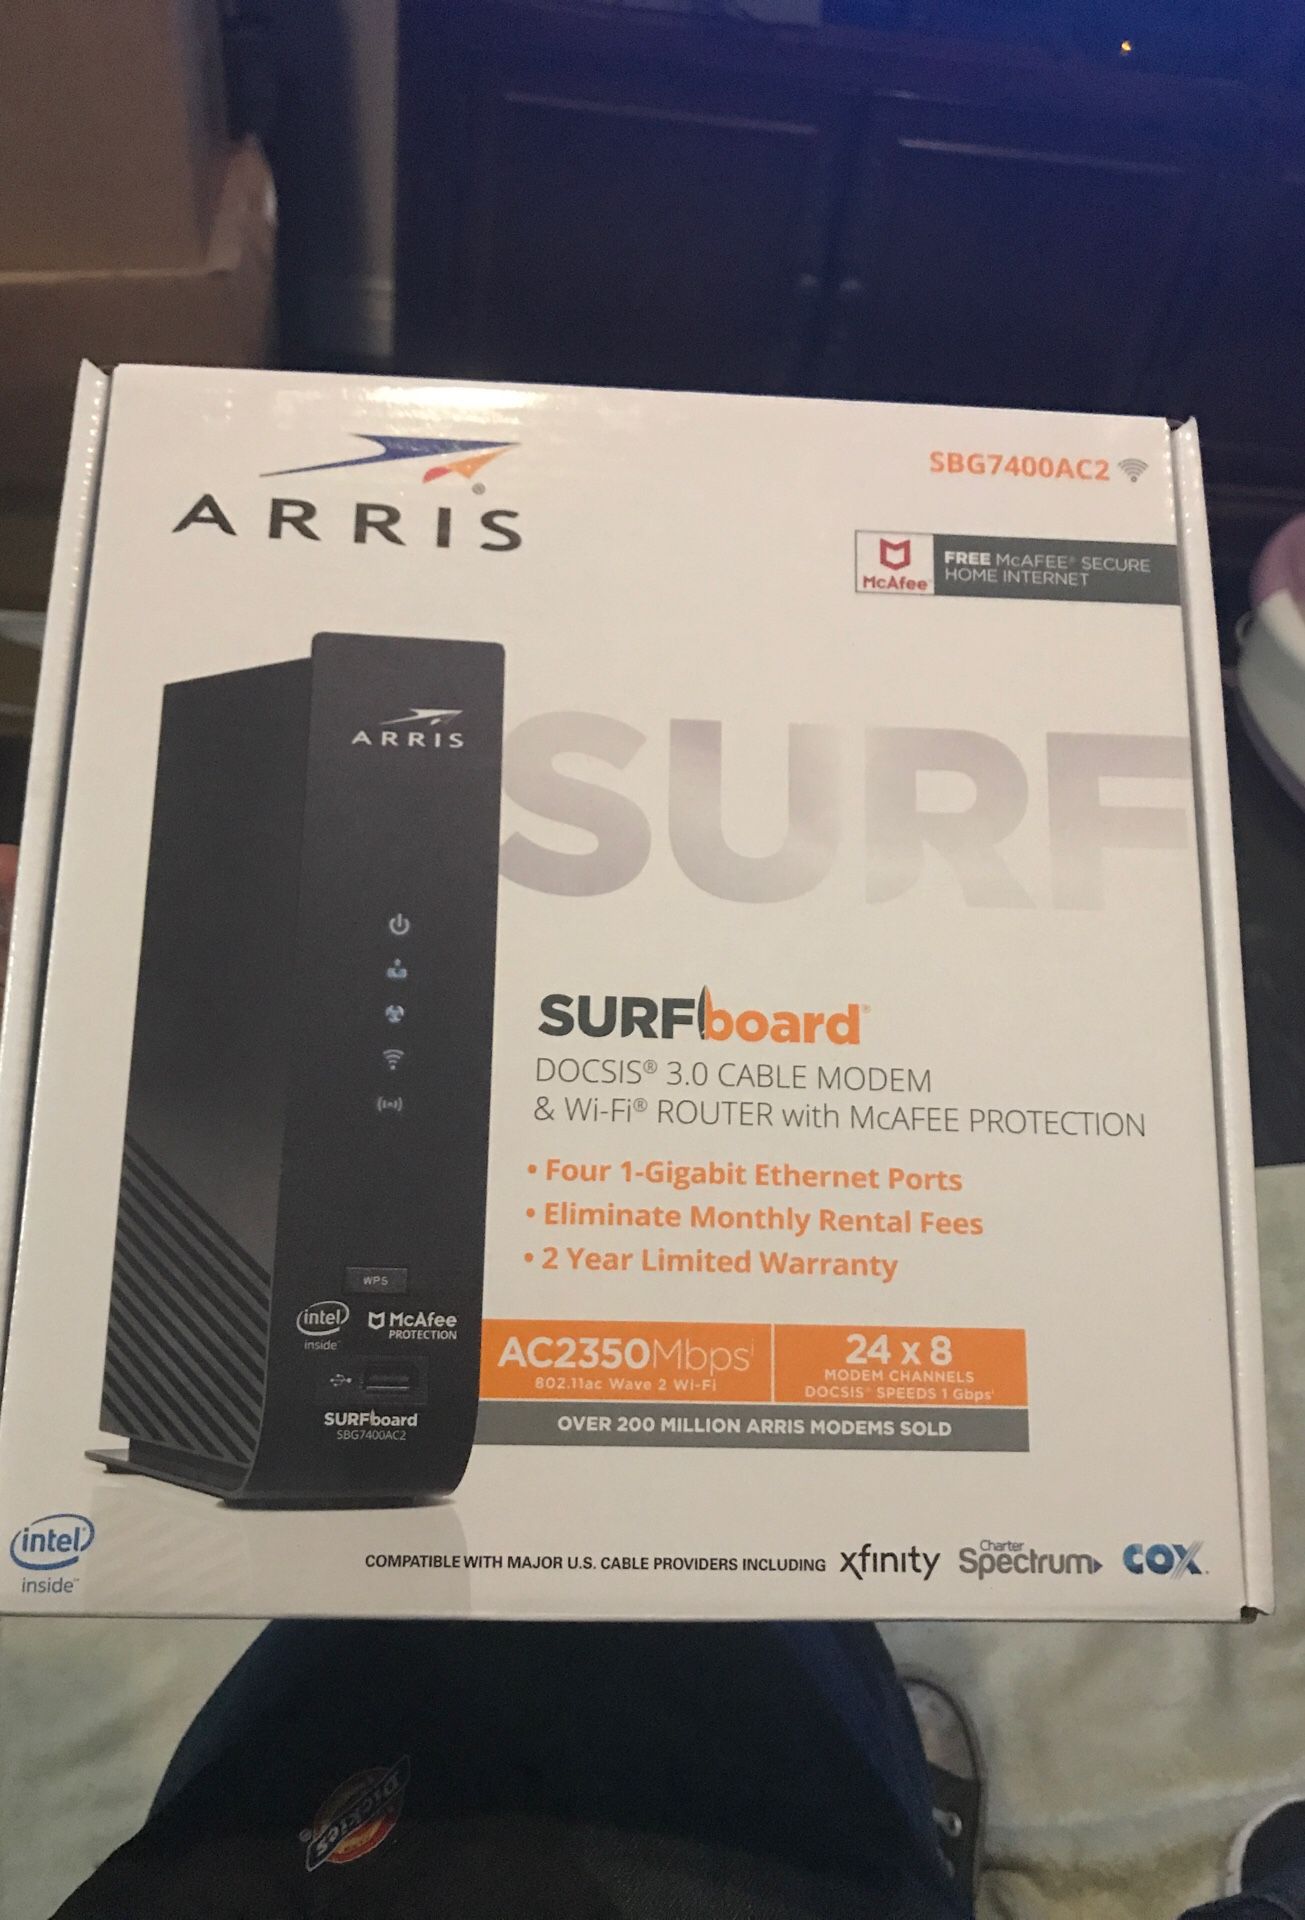 Arris surfboard Docsis 3.0 Cable Modem & wi-fi router with mcaFee Protection SBG7400AC2